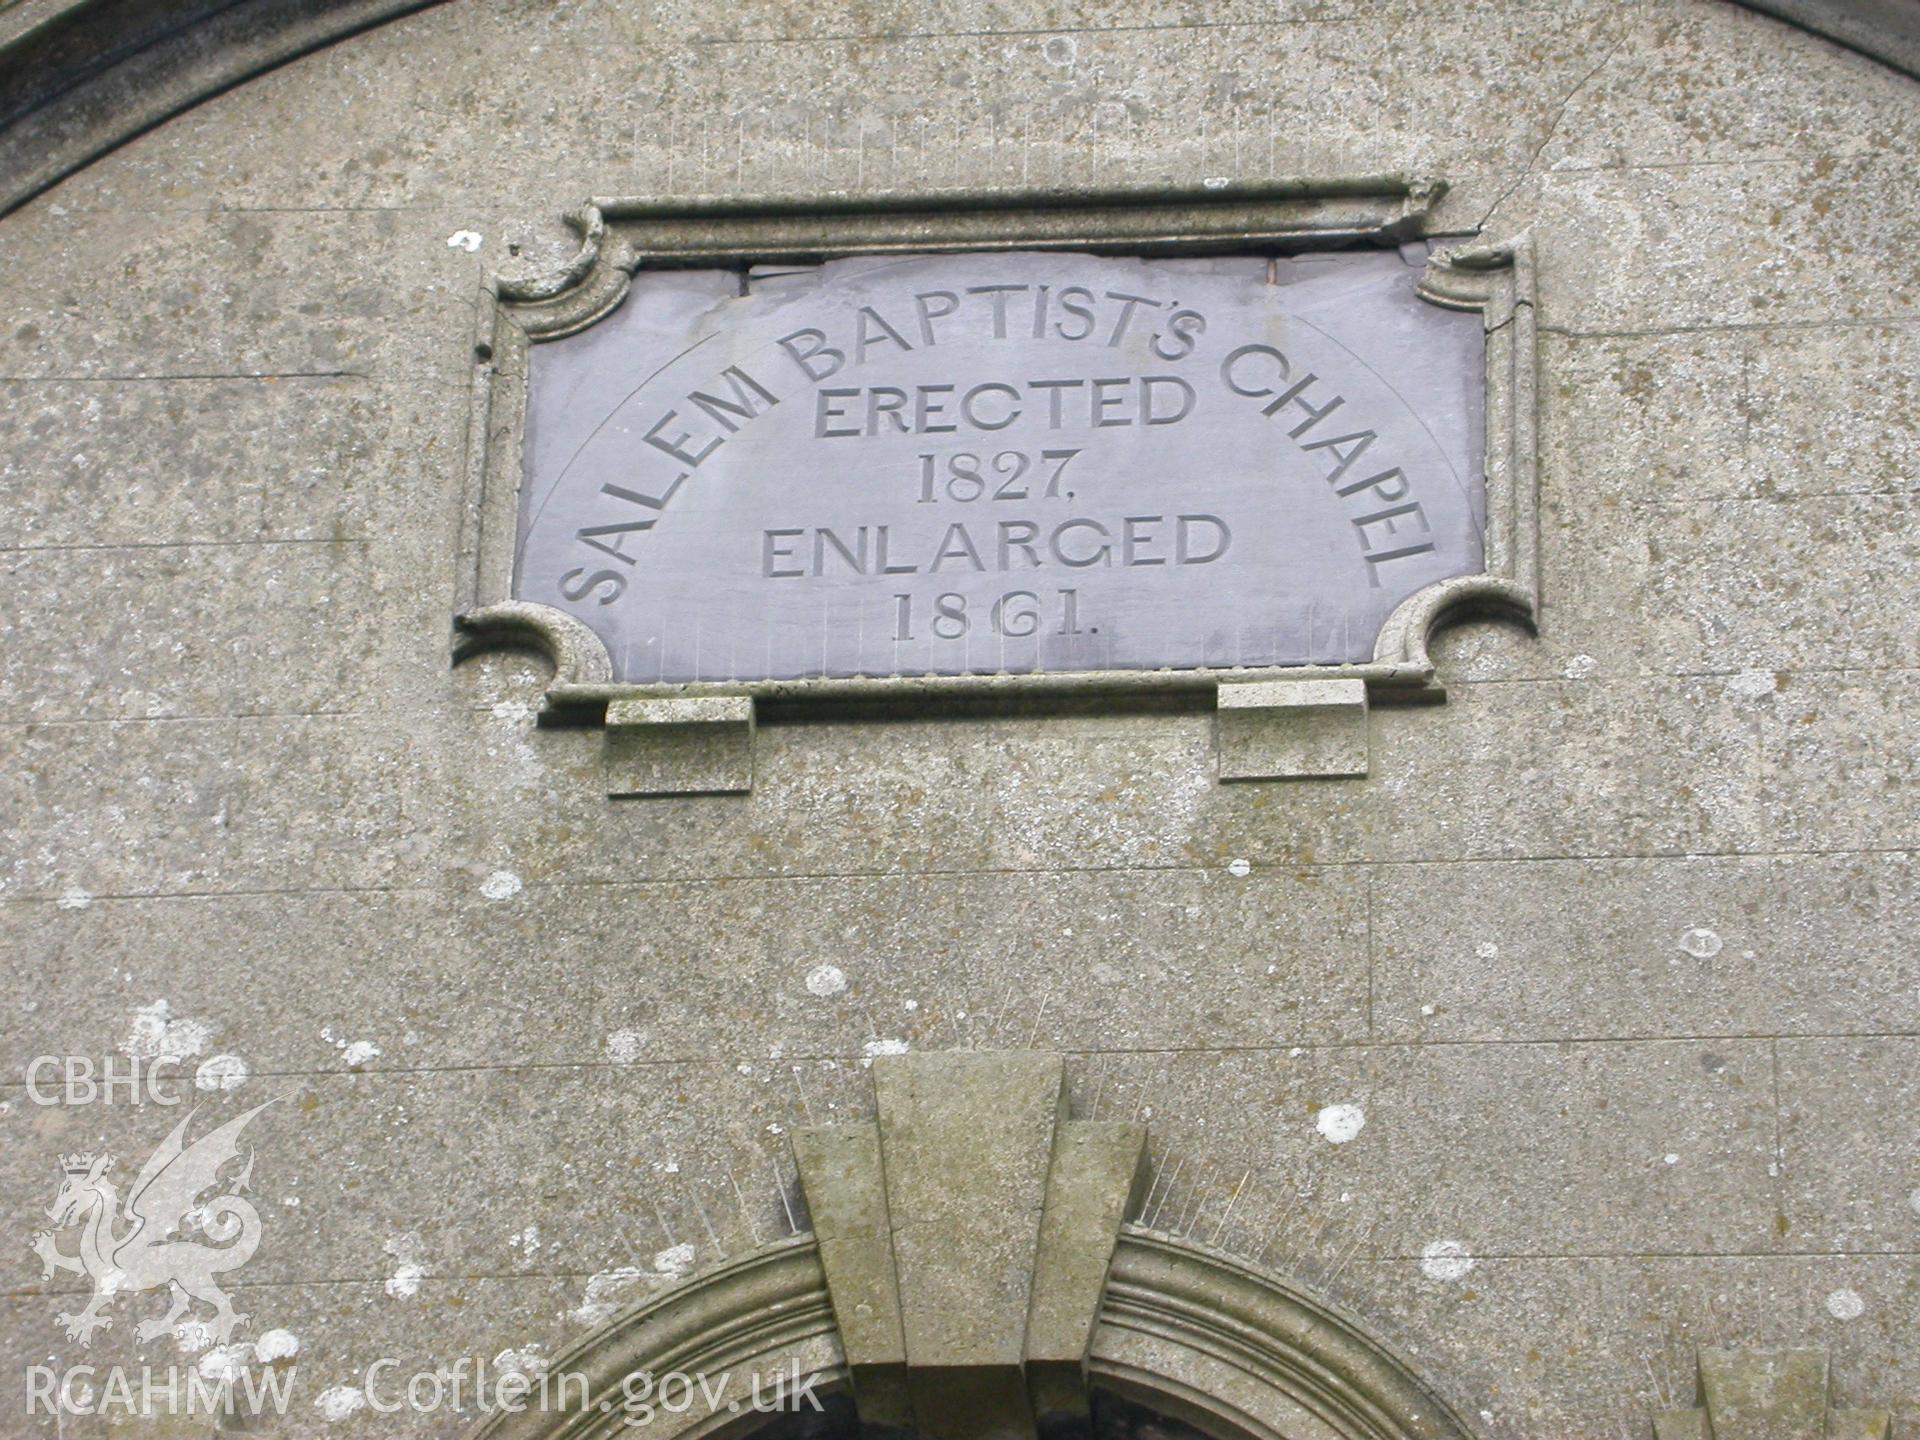 Plaque in gable of chapel front